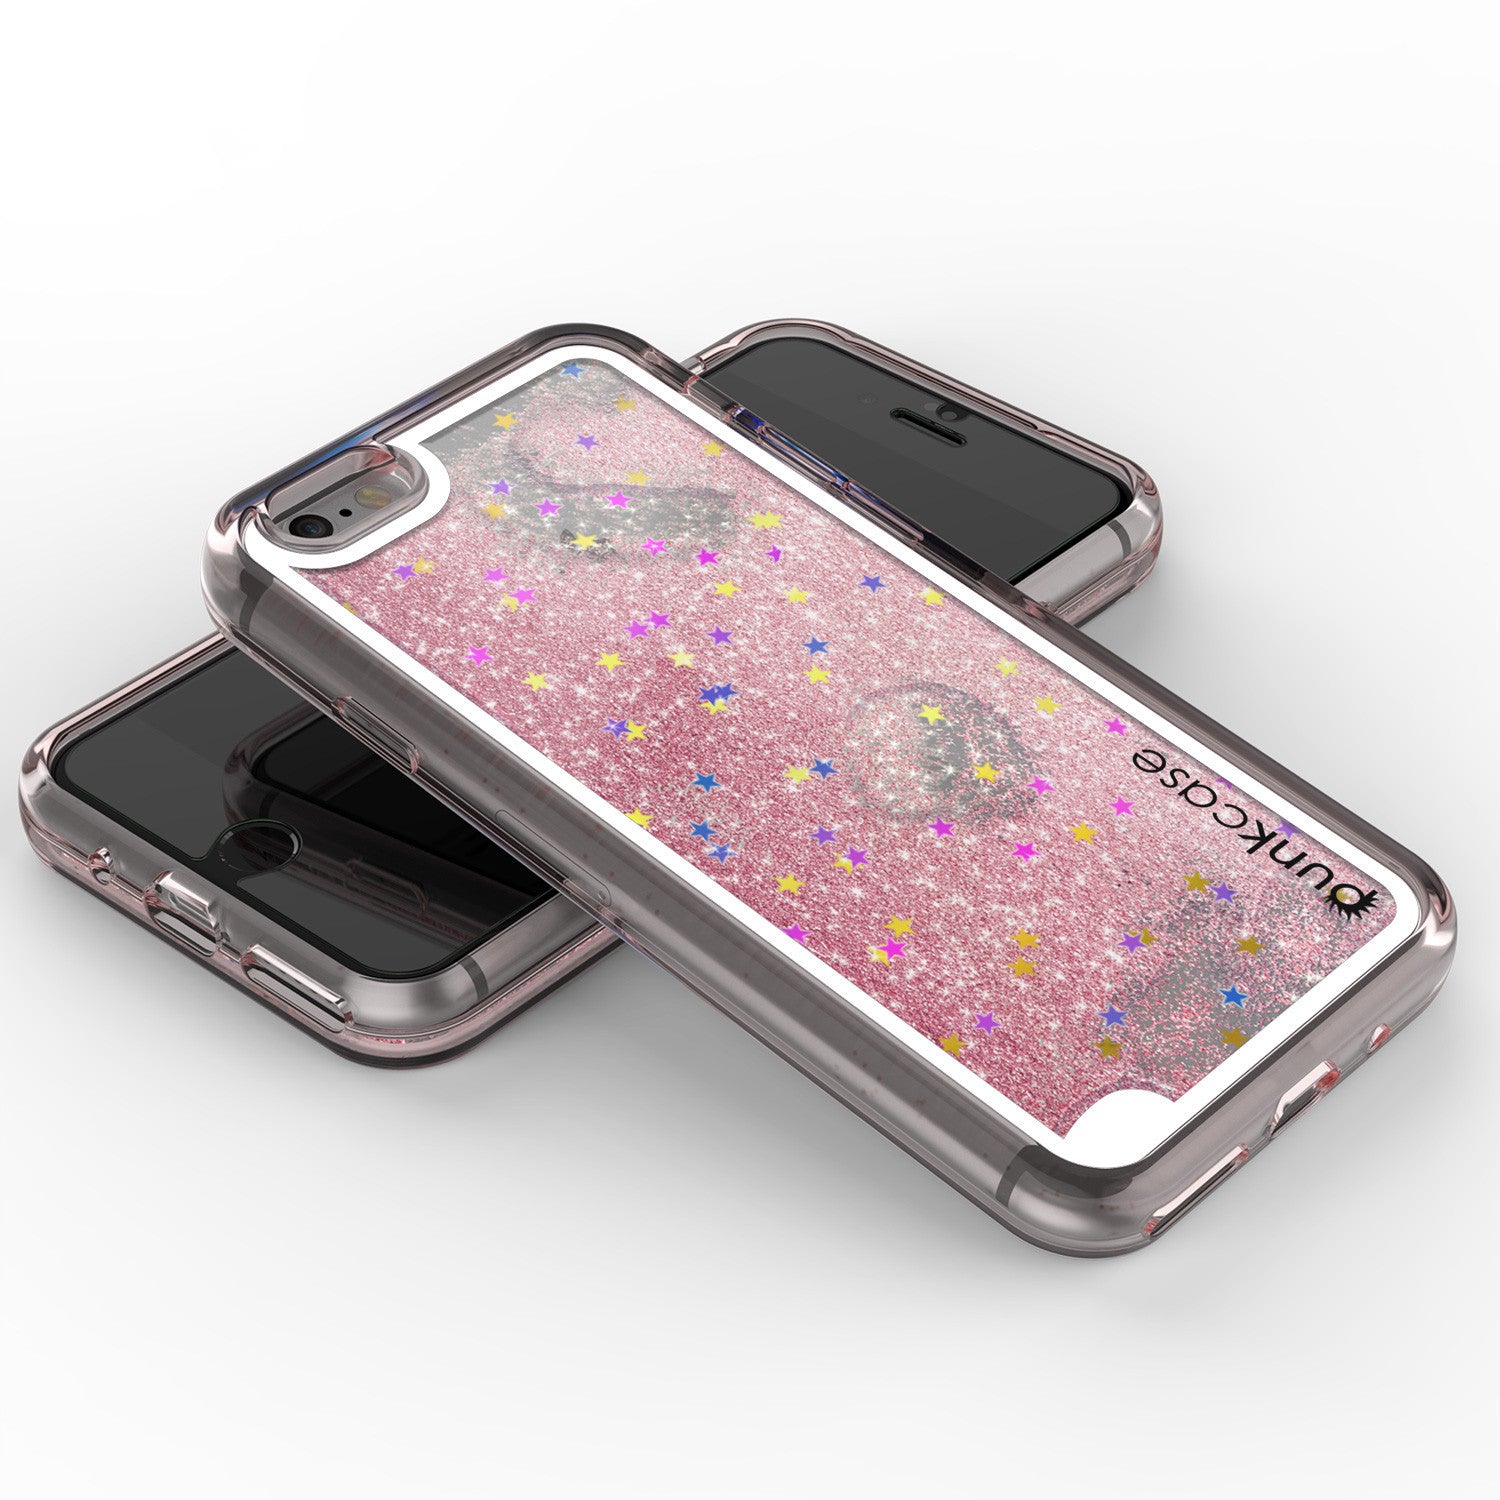 iPhone 7 Case, PunkCase LIQUID Rose Series, Protective Dual Layer Floating Glitter Cover